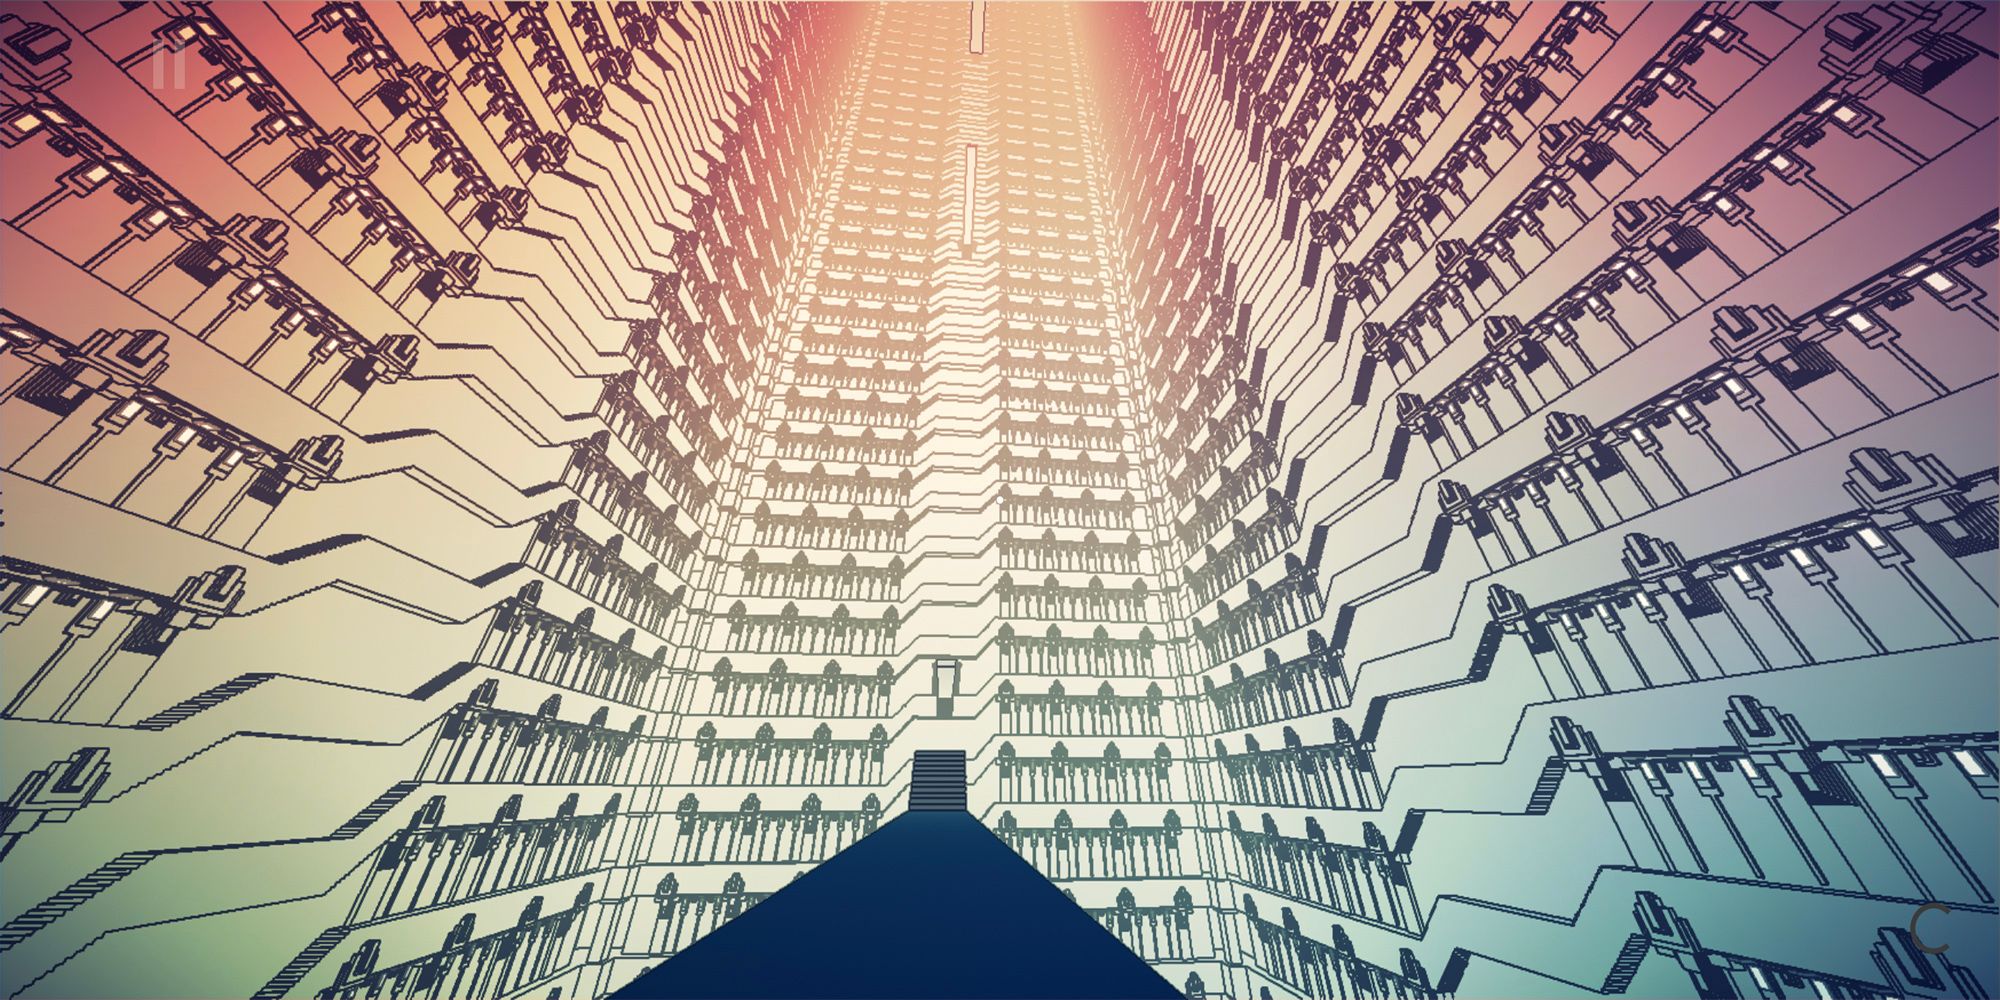 The inner corridor of a large tower in Manifold Garden.